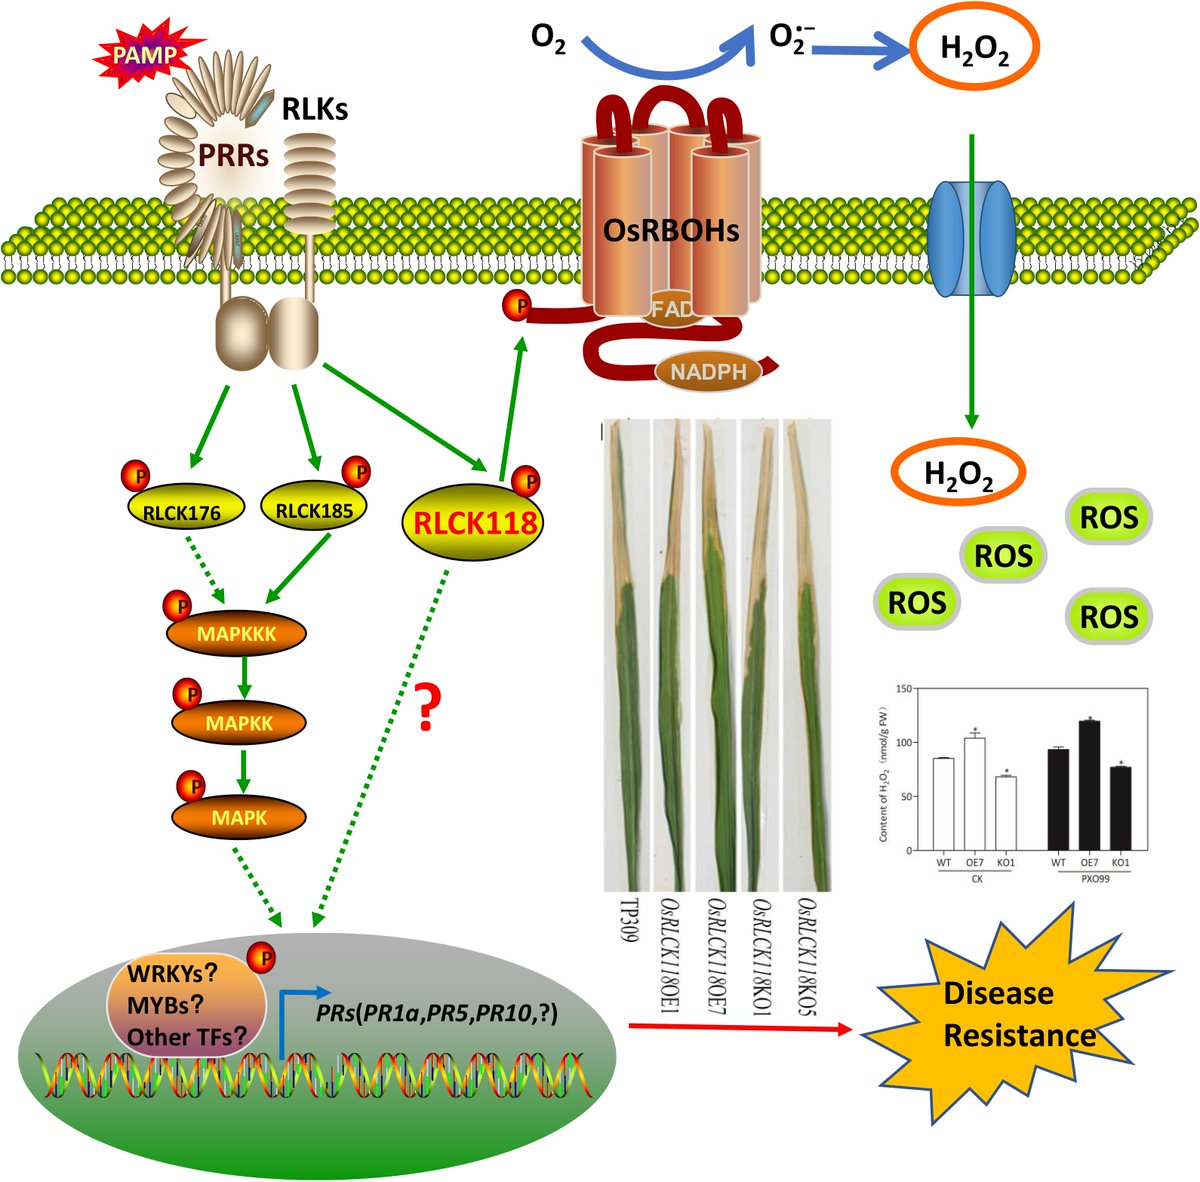 OsRLCK118 in rice regulates plant development and immunity. Silencing alters traits and increases susceptibility to pathogens, while overexpression enhances disease resistance. Implications for defense signaling pathway. #RLCK #PlantImmunity #Rice Details:maxapress.com/article/doi/10…